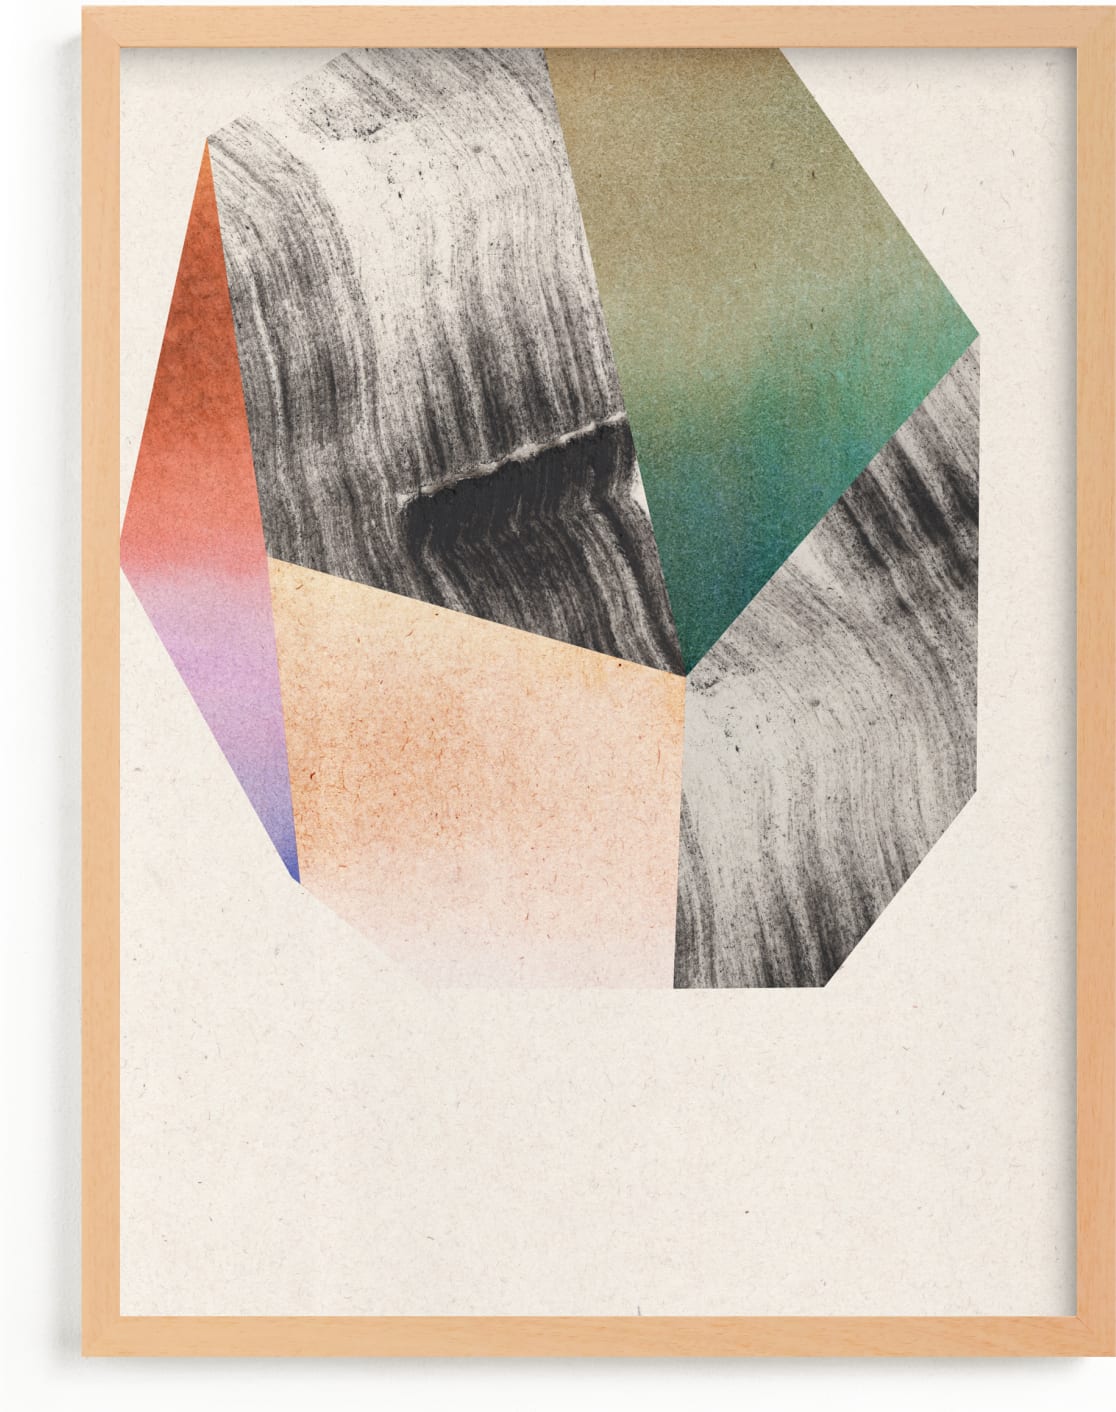 This is a colorful, beige art by Sumak Studio called Unexpected Crystals II.